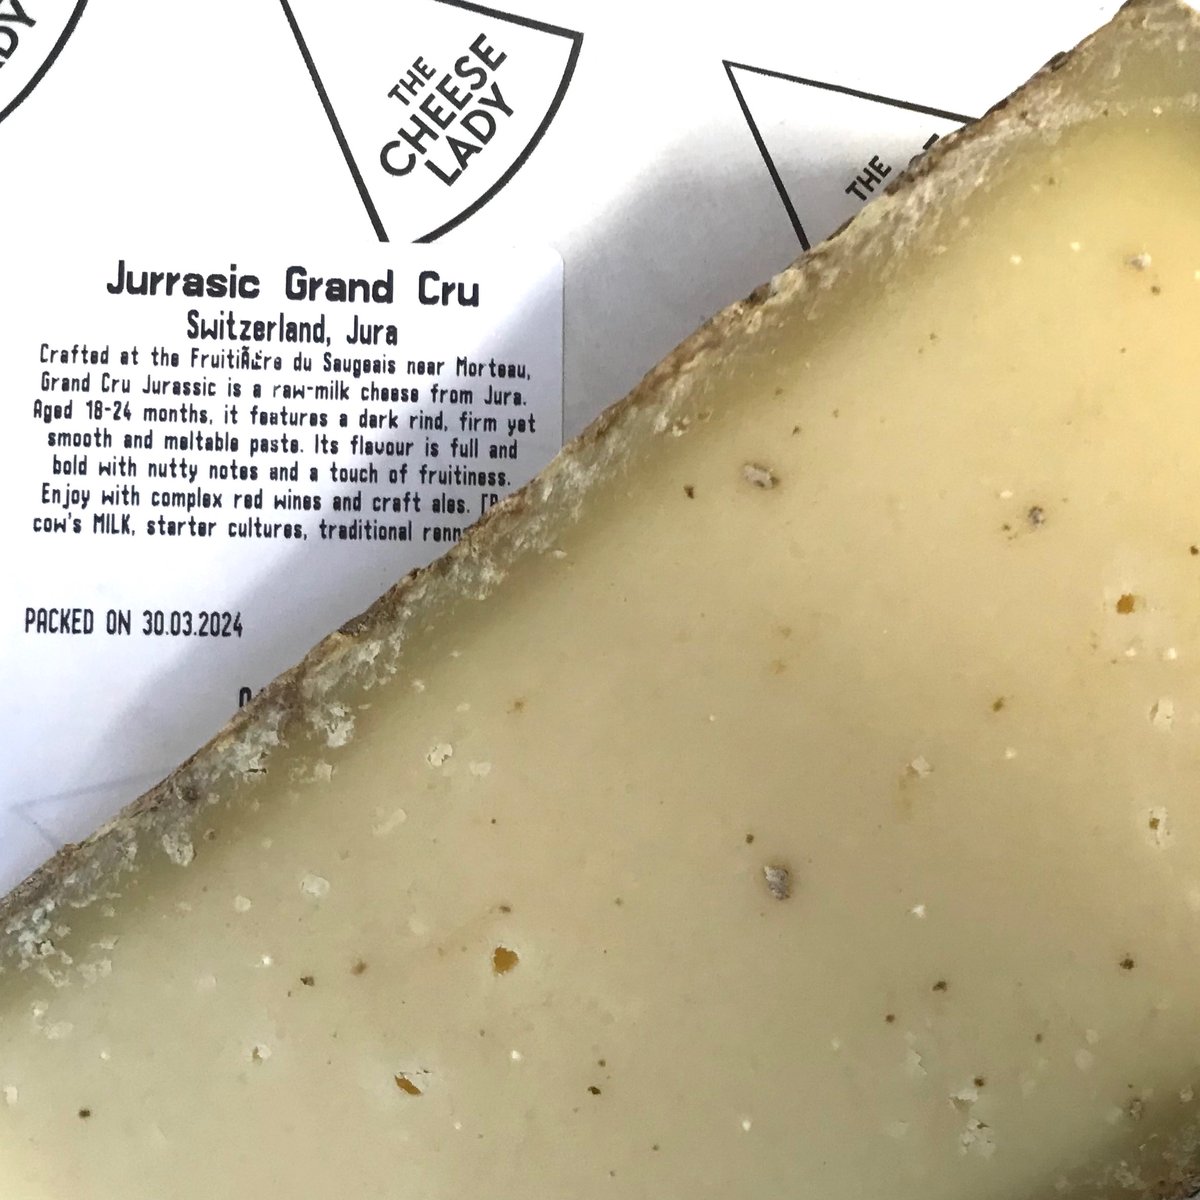 Found the perfect geological cheese at my local cheese shop today and just had to have some, typo notwithstanding! #Jurassic